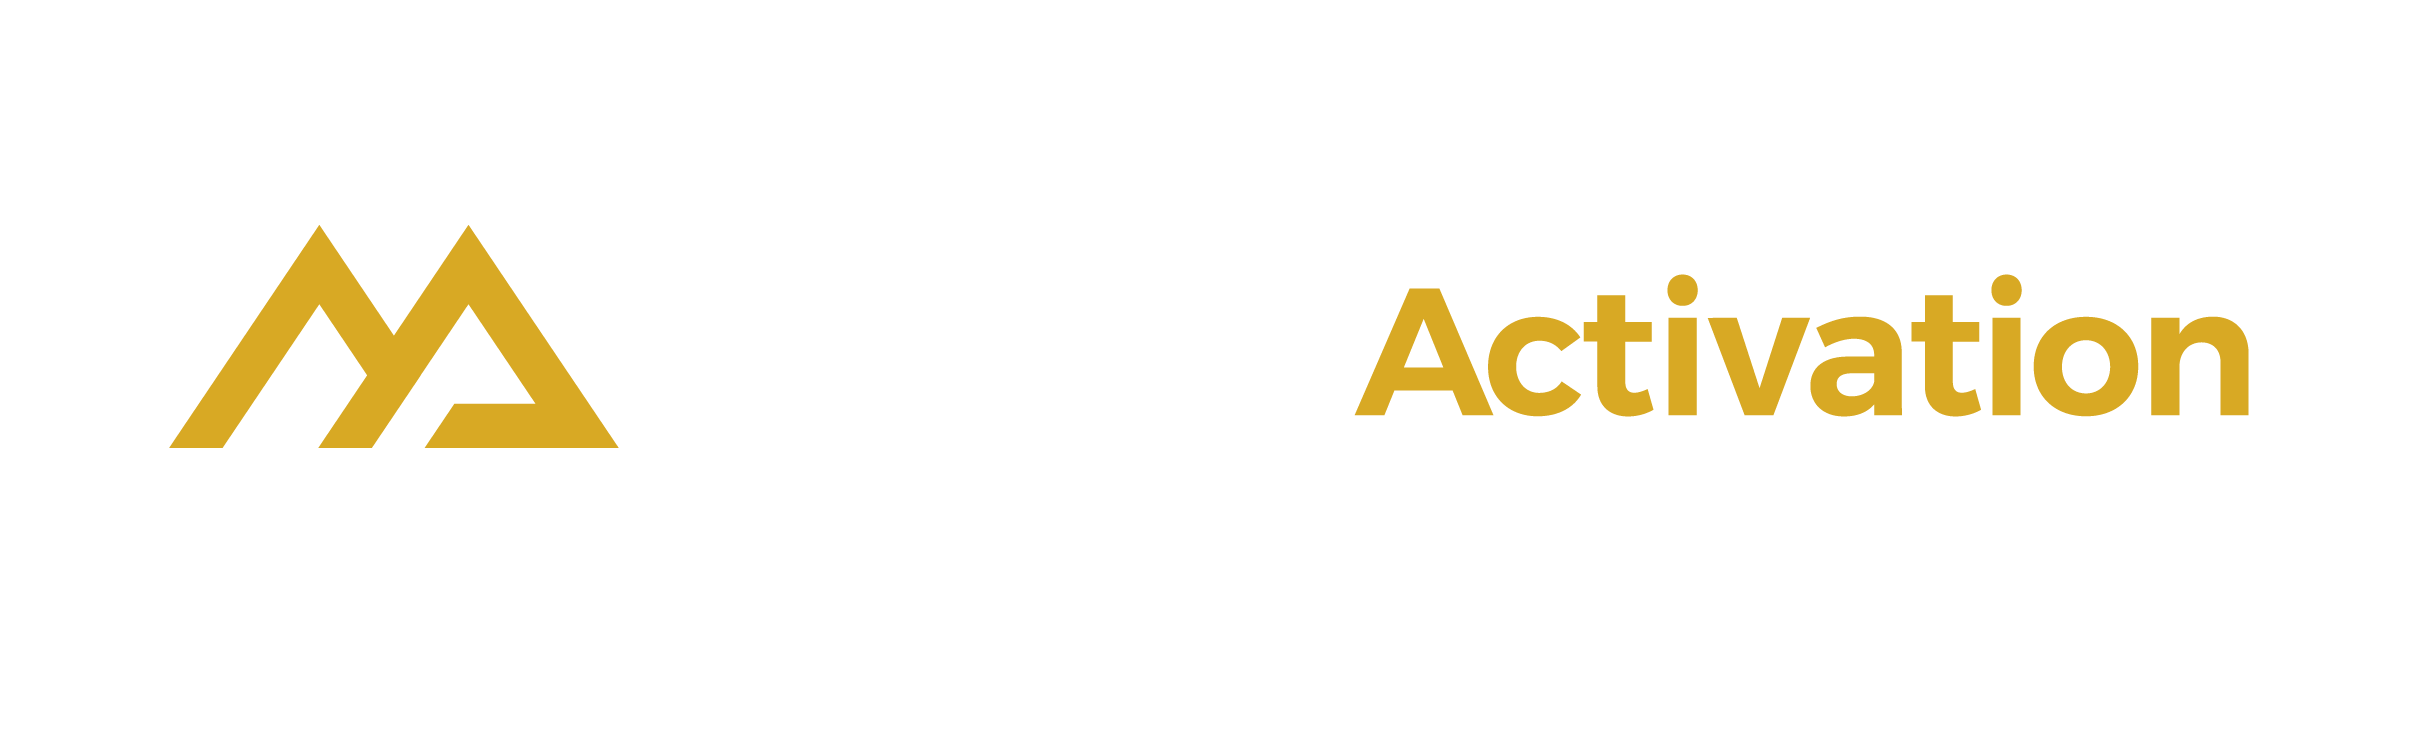 Muscle Activation Consulting | Chad Graham